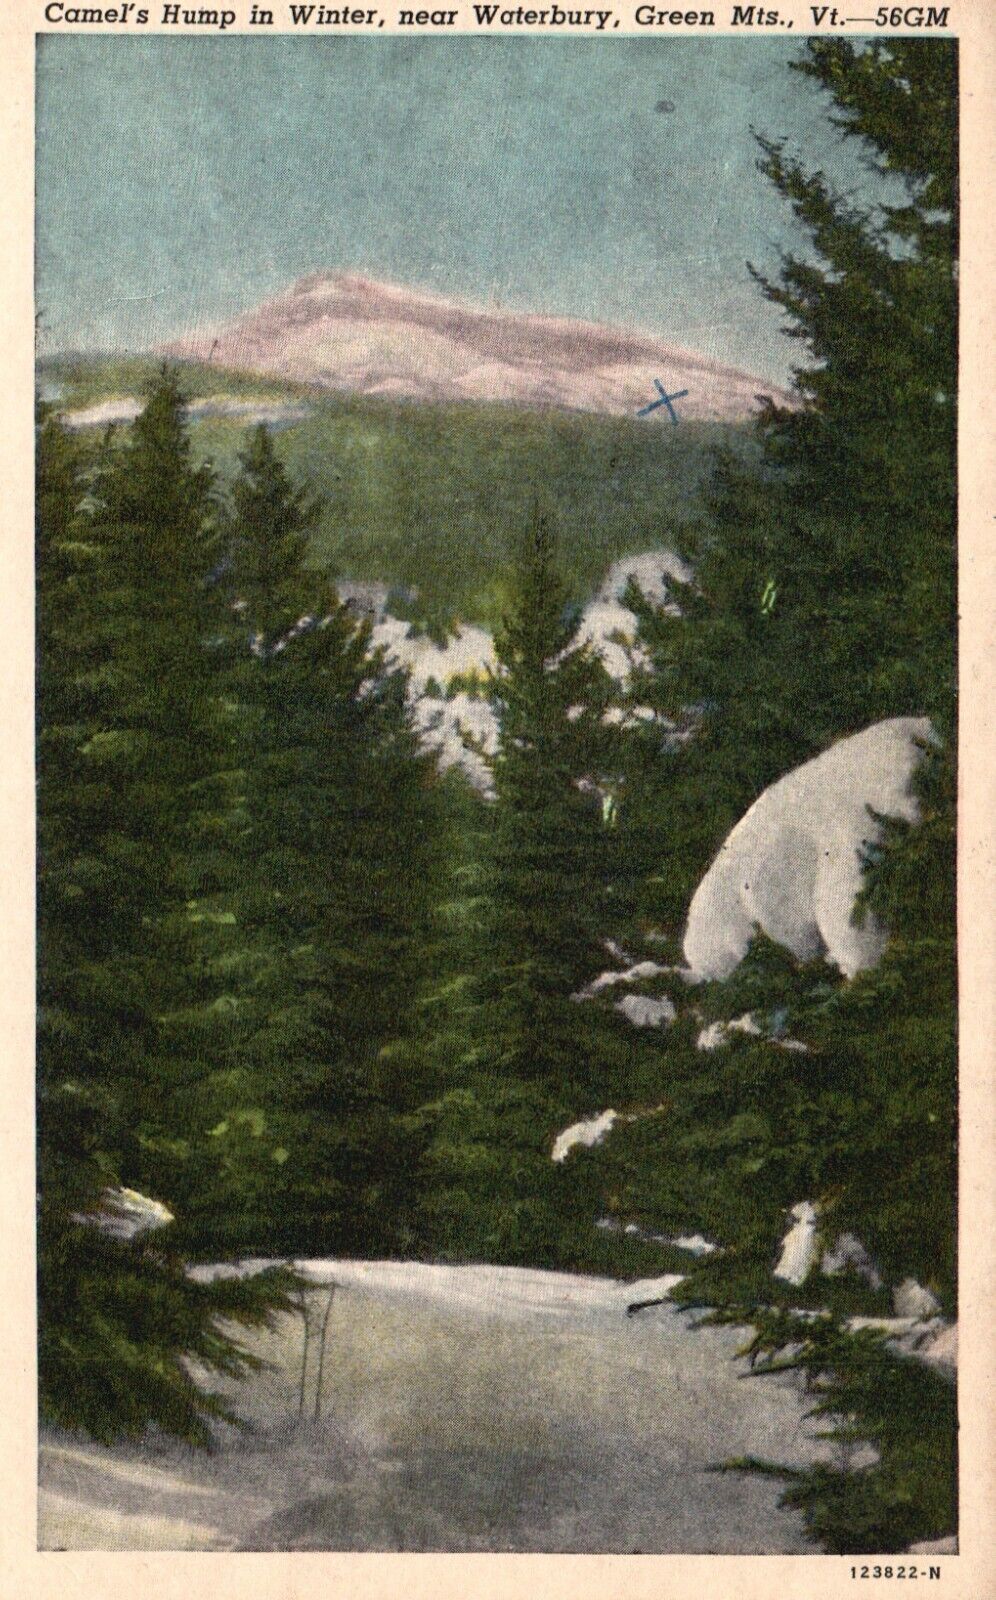 Postcard VT near Waterbury, Green Mts Camels Hump in Winter Vintage PC e4617